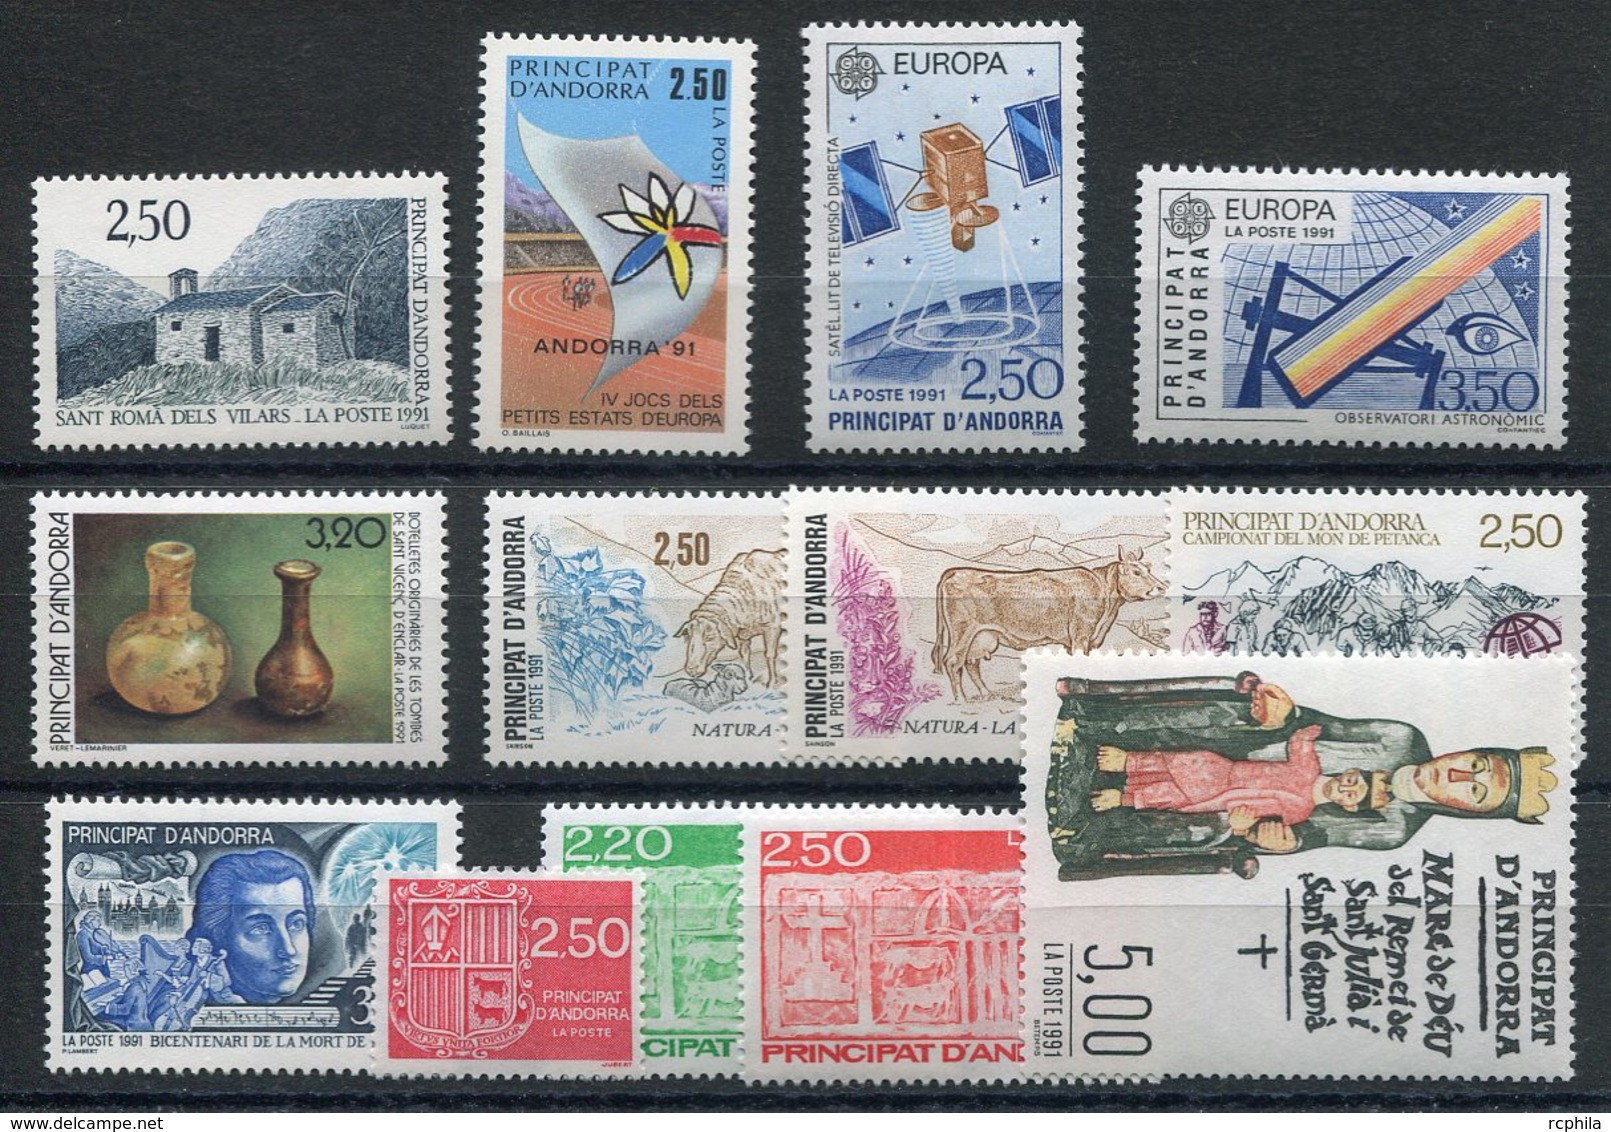 RC 19322 ANDORRE COTE 45,40€ - 1991 ANNÉE COMPLETE SOIT 13 TIMBRES N° 400 / 412 NEUF ** MNH TB - Años Completos